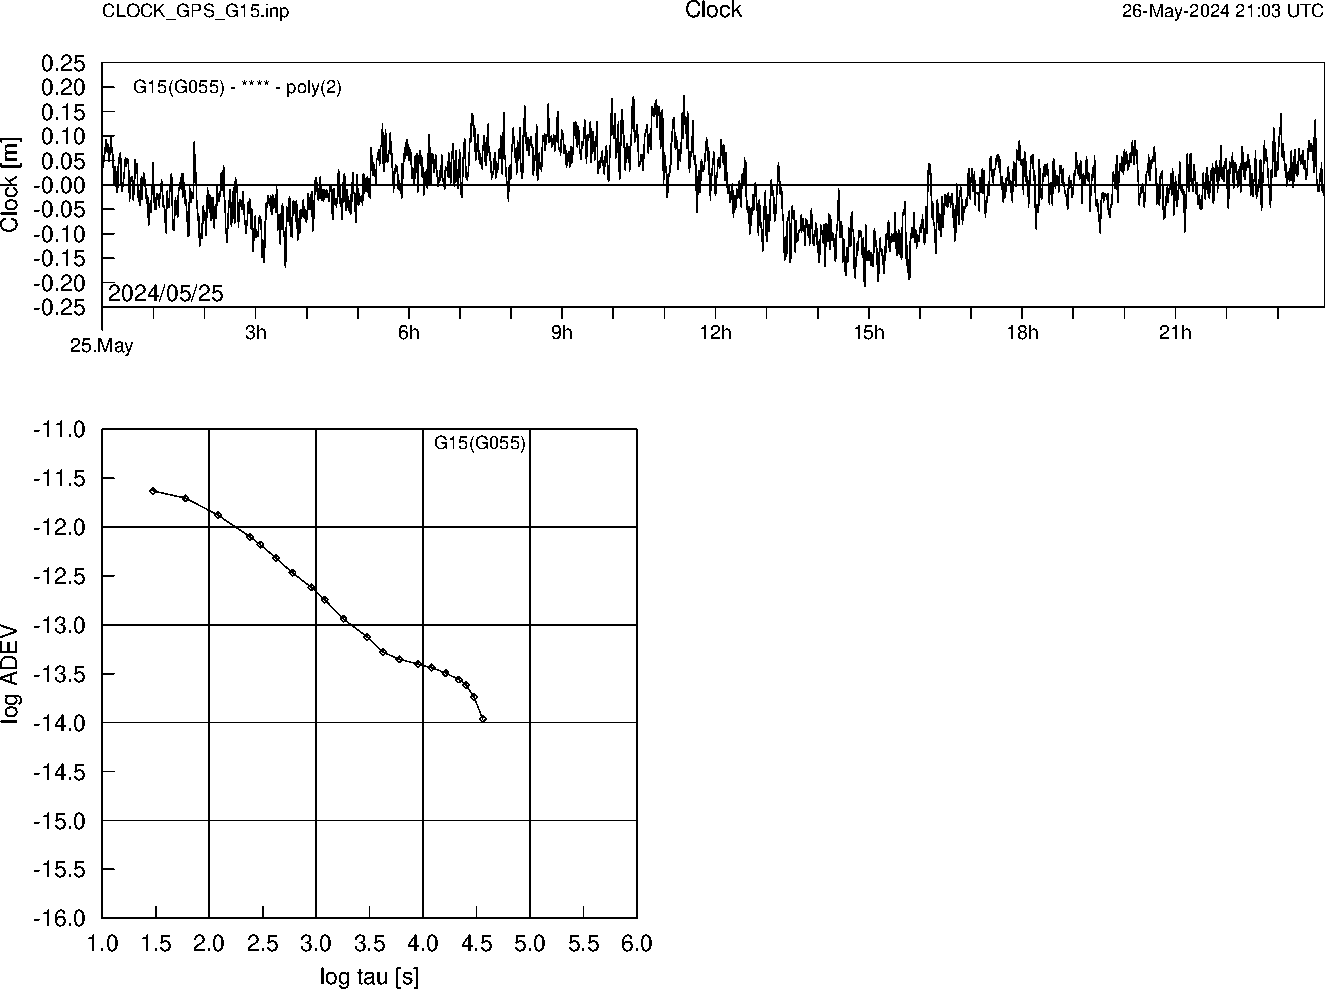 GPS G15 Clock Time Series and Allan Deviation